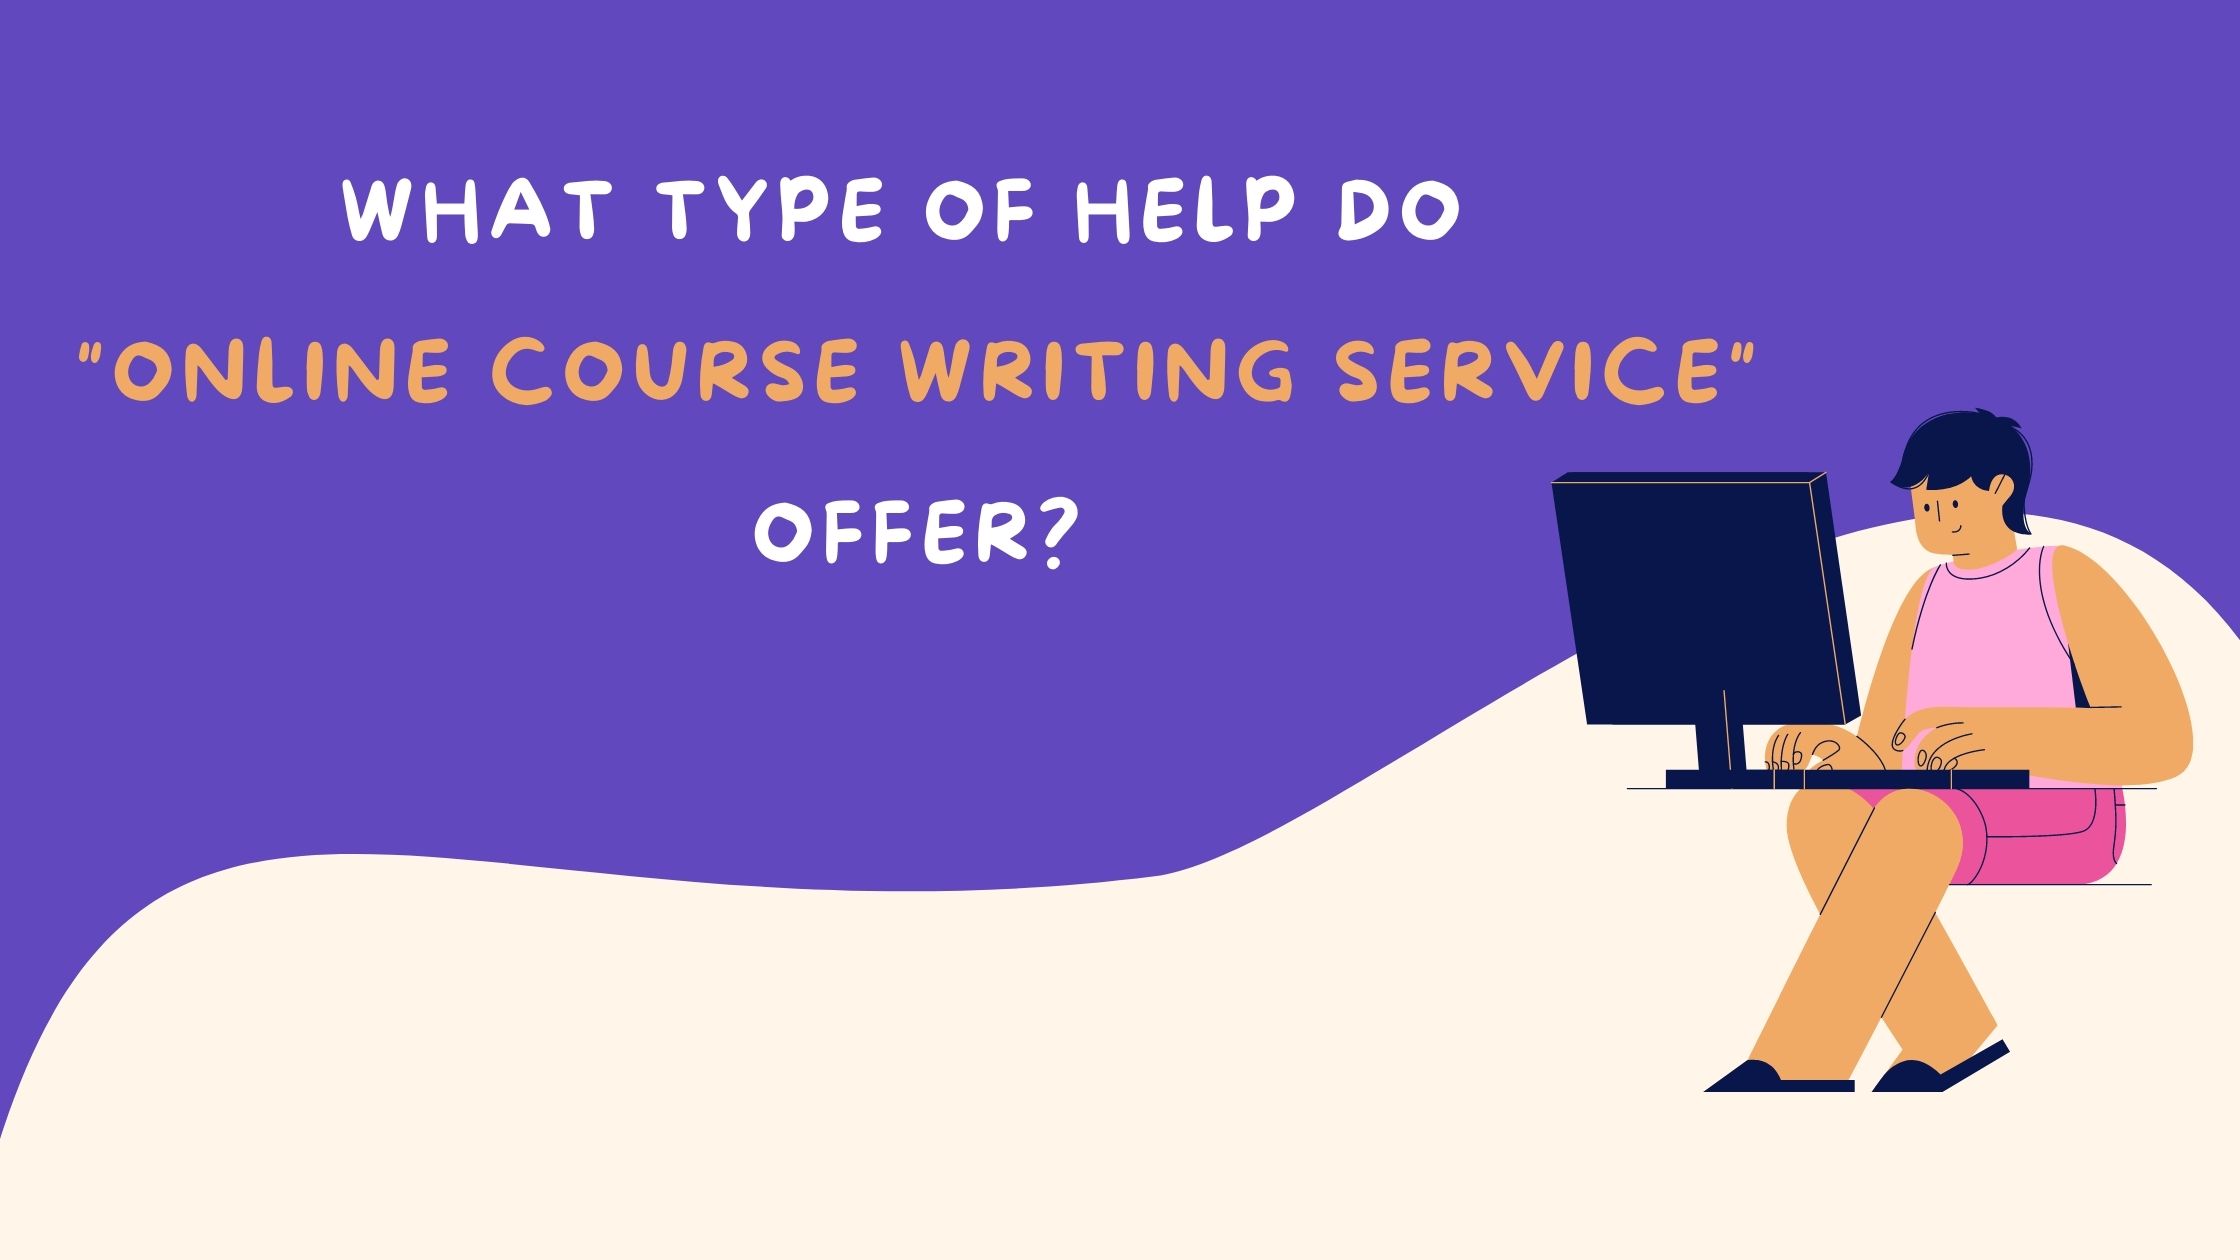 What type of help do online course writing service offer